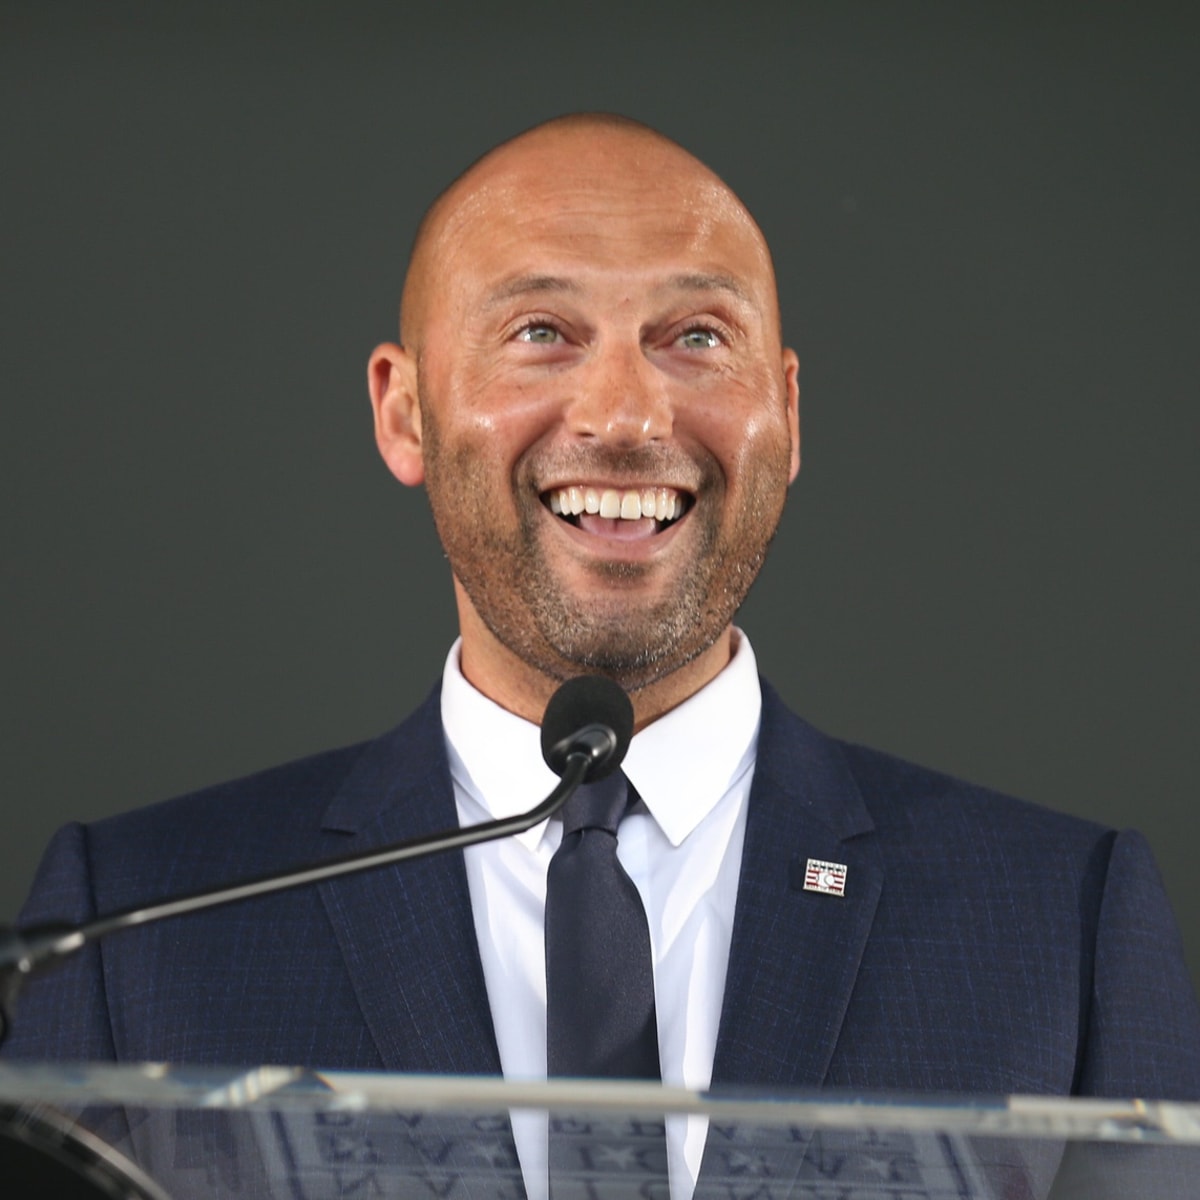 Yankees legend Derek Jeter shines at Hall of Fame induction in Cooperstown  - Sports Illustrated NY Yankees News, Analysis and More